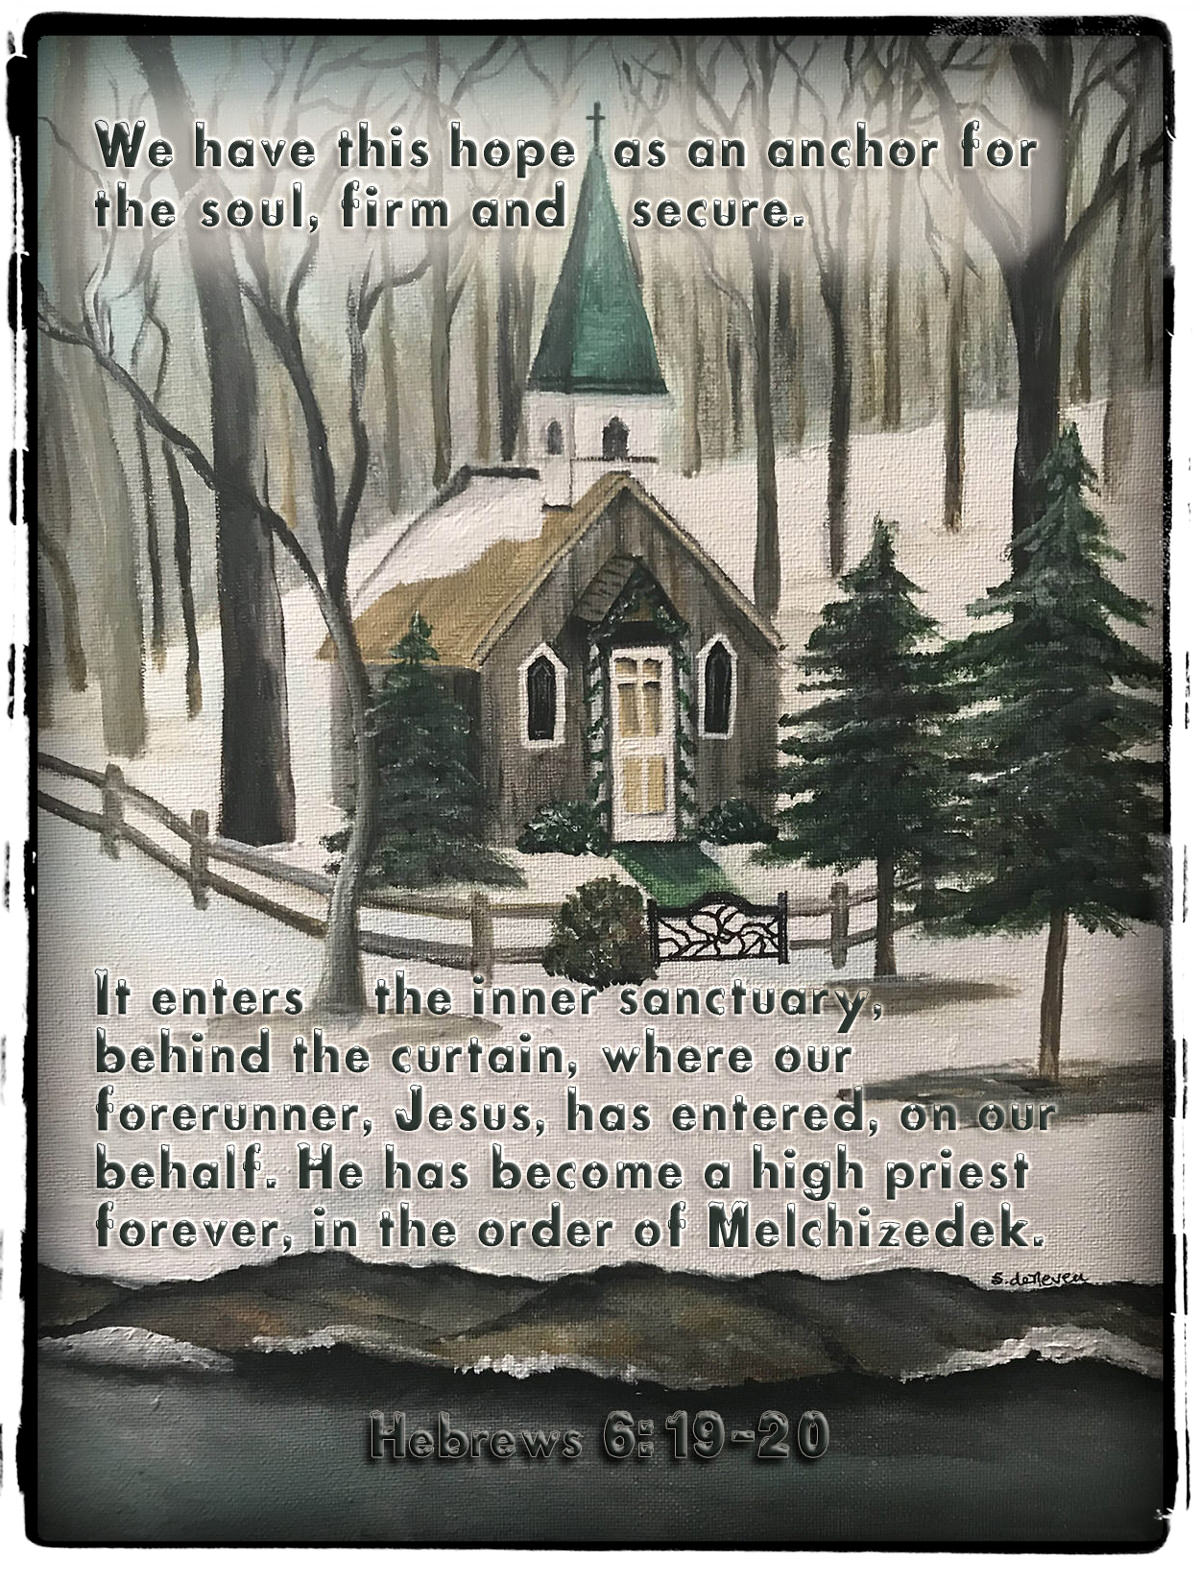 Scripture picture of Hebrews 6:19-20, emphasizing the fact that 'Jesus has entered the sanctuary on our behalf.'